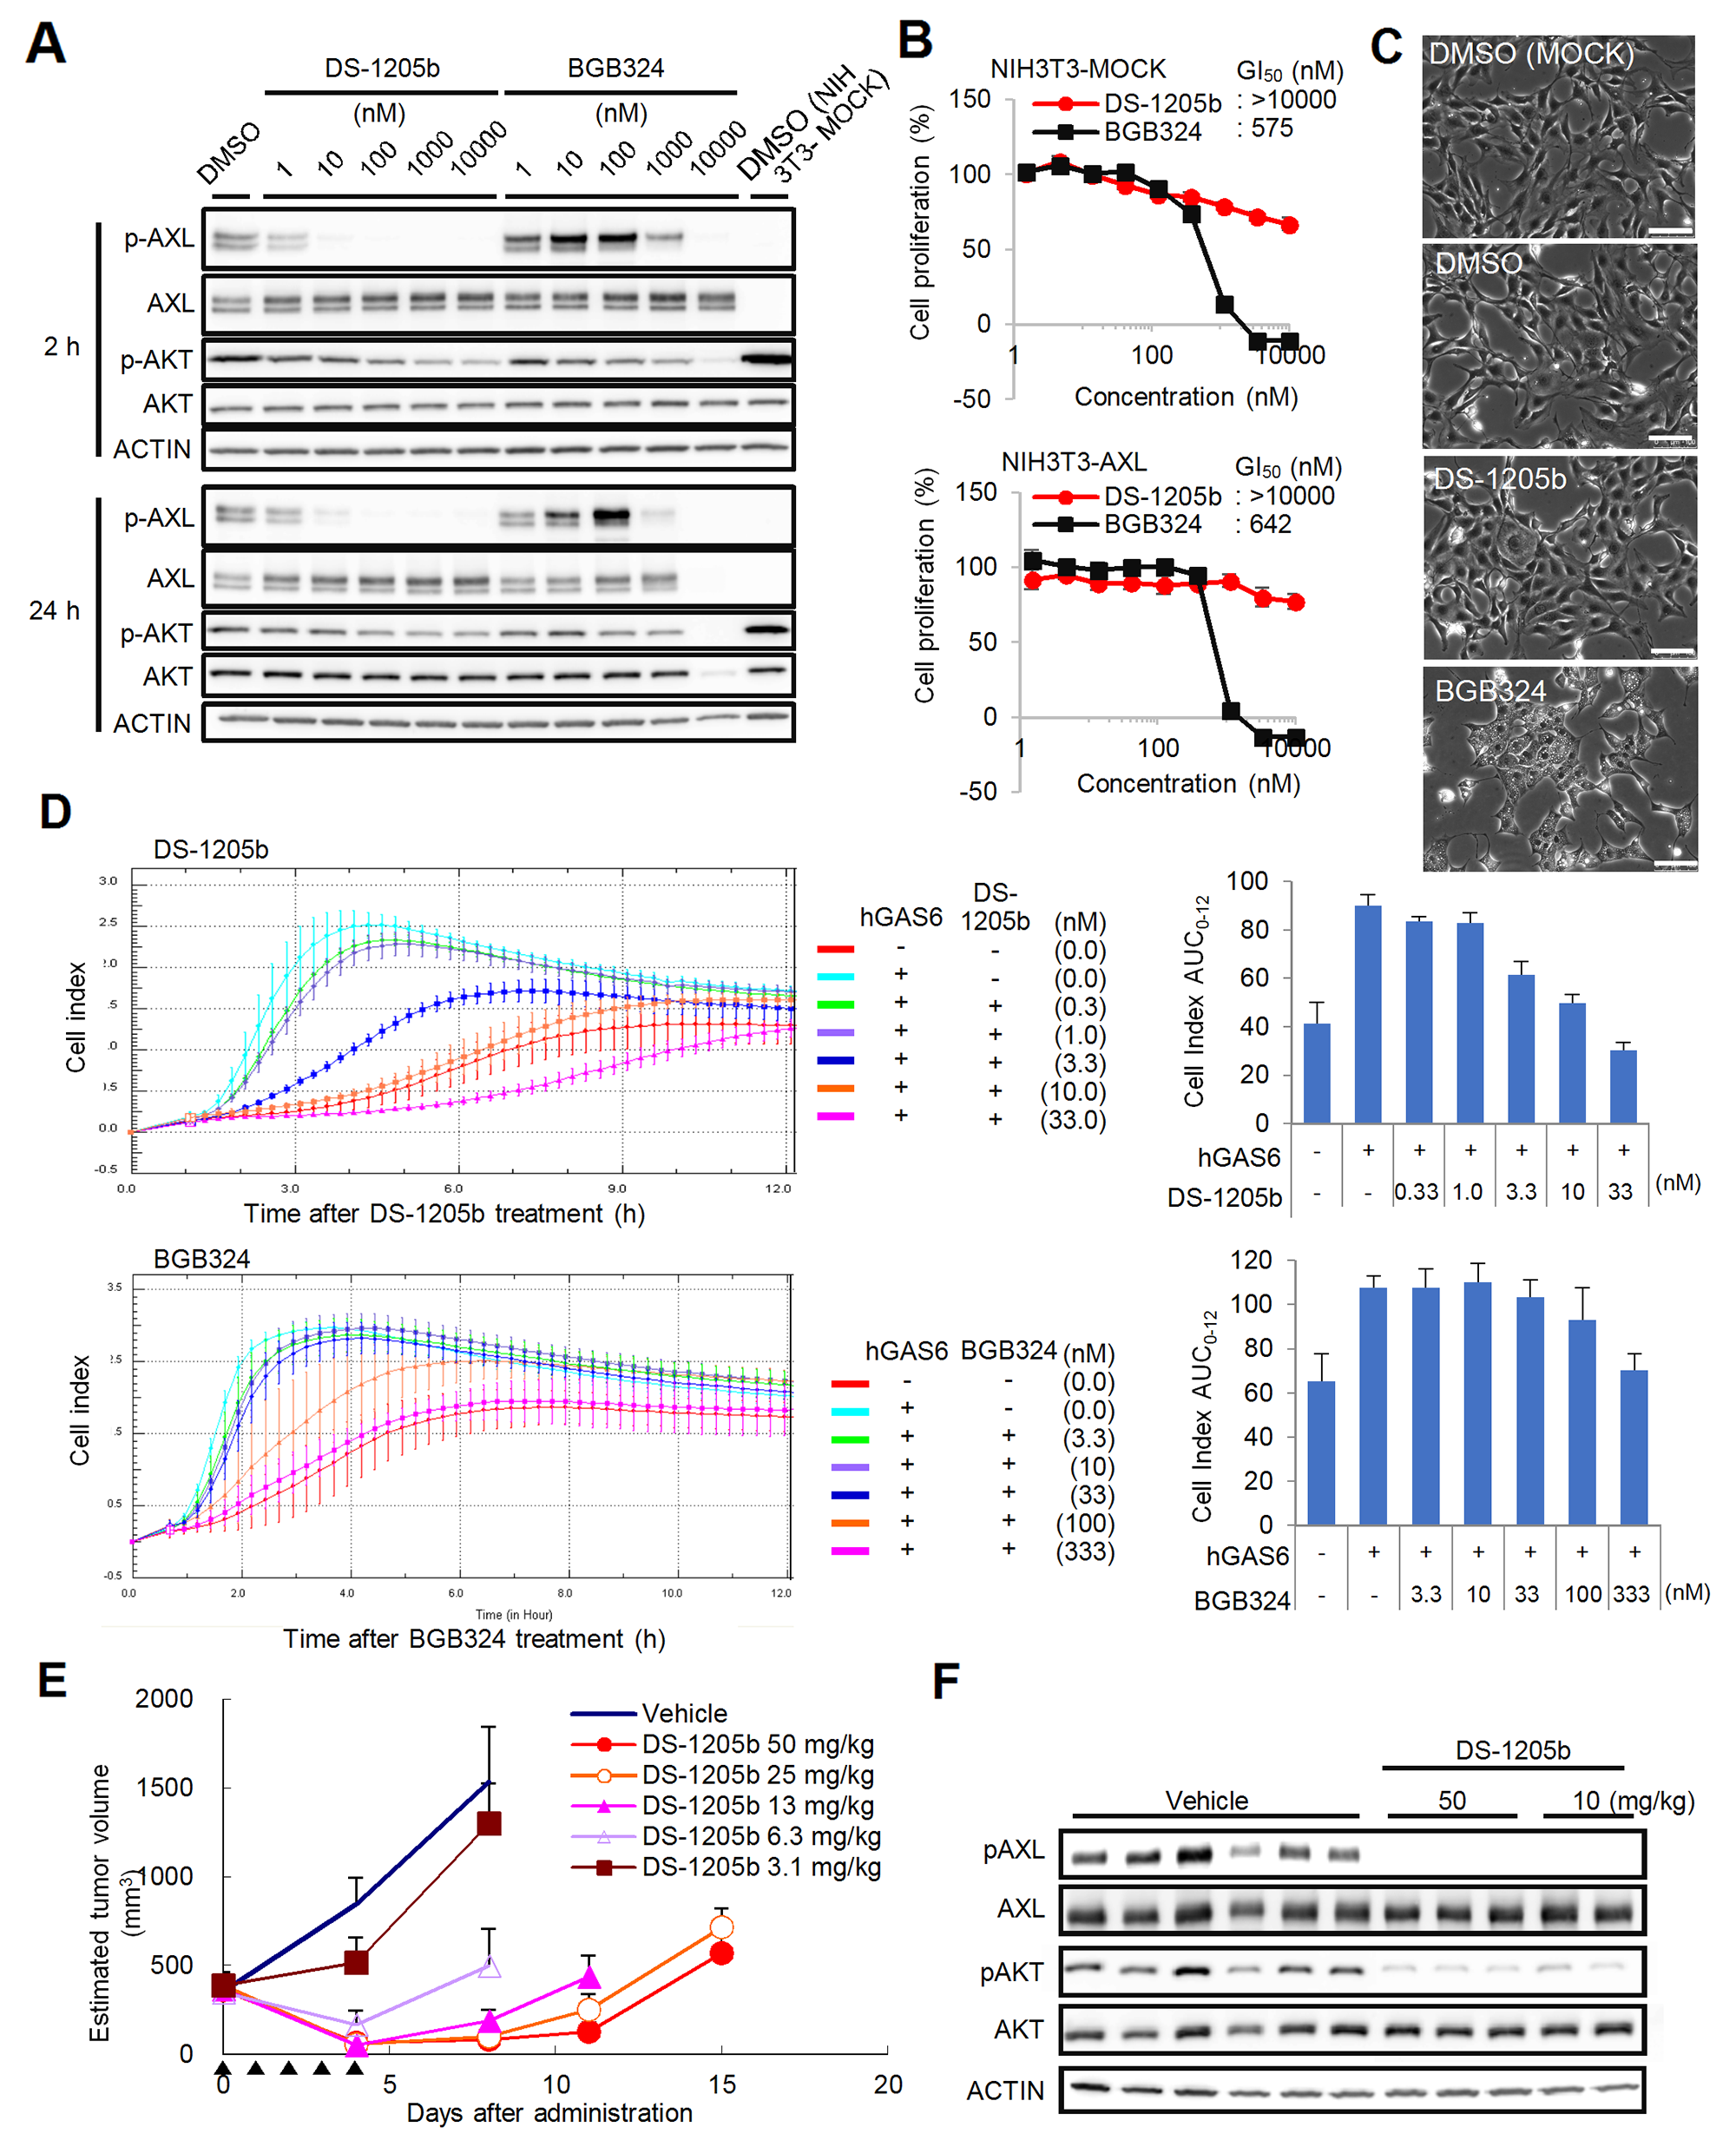 Effects of DS-1205b and/or BGB324 in NIH3T3-AXL cells in vitro and in vivo.